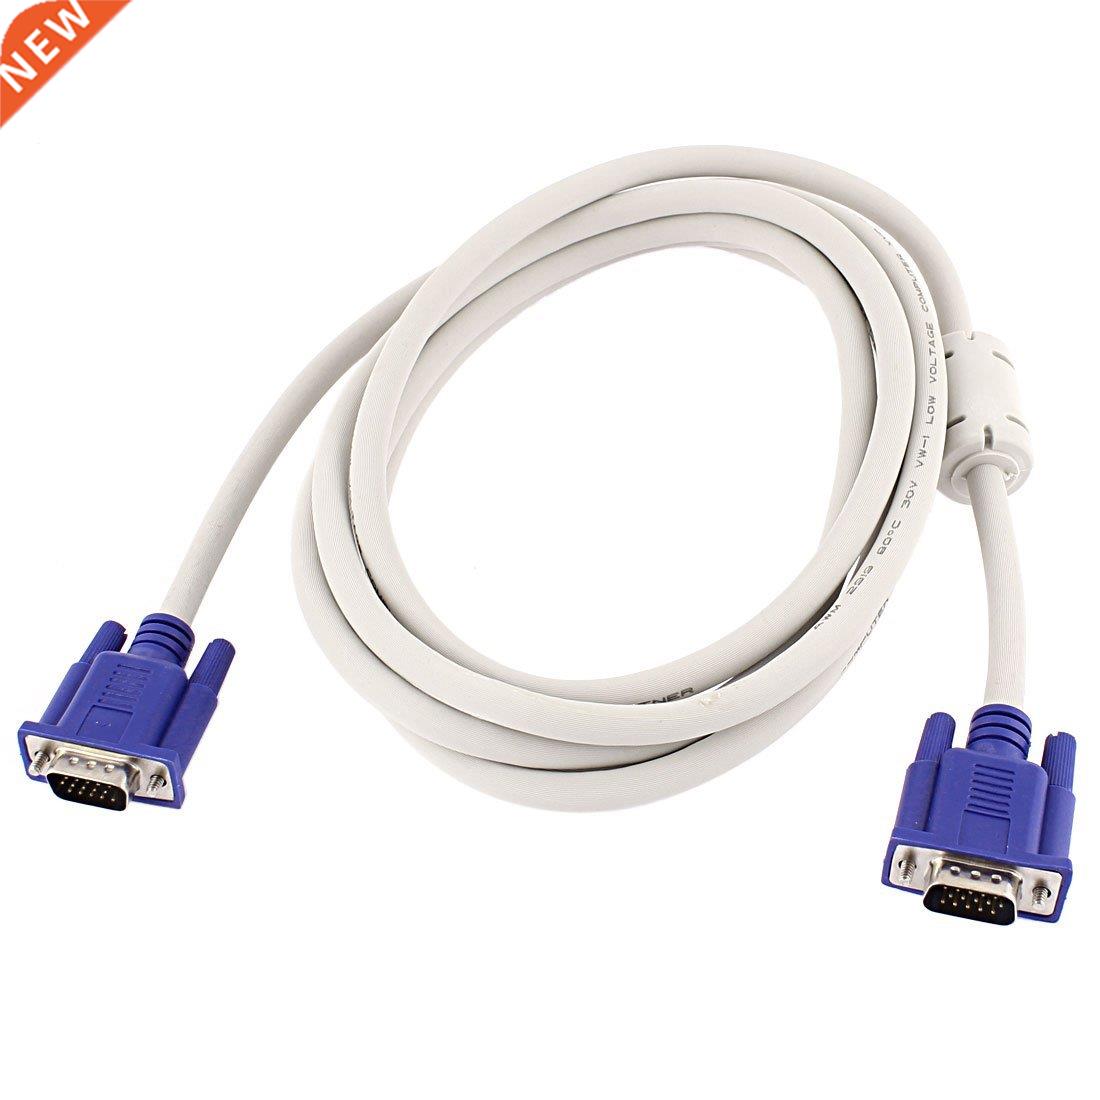 3 Meters 9.8Ft 15 Pin VGA Male to Male Cable Cord Adapter fo 商业/办公家具 商业美陈 原图主图